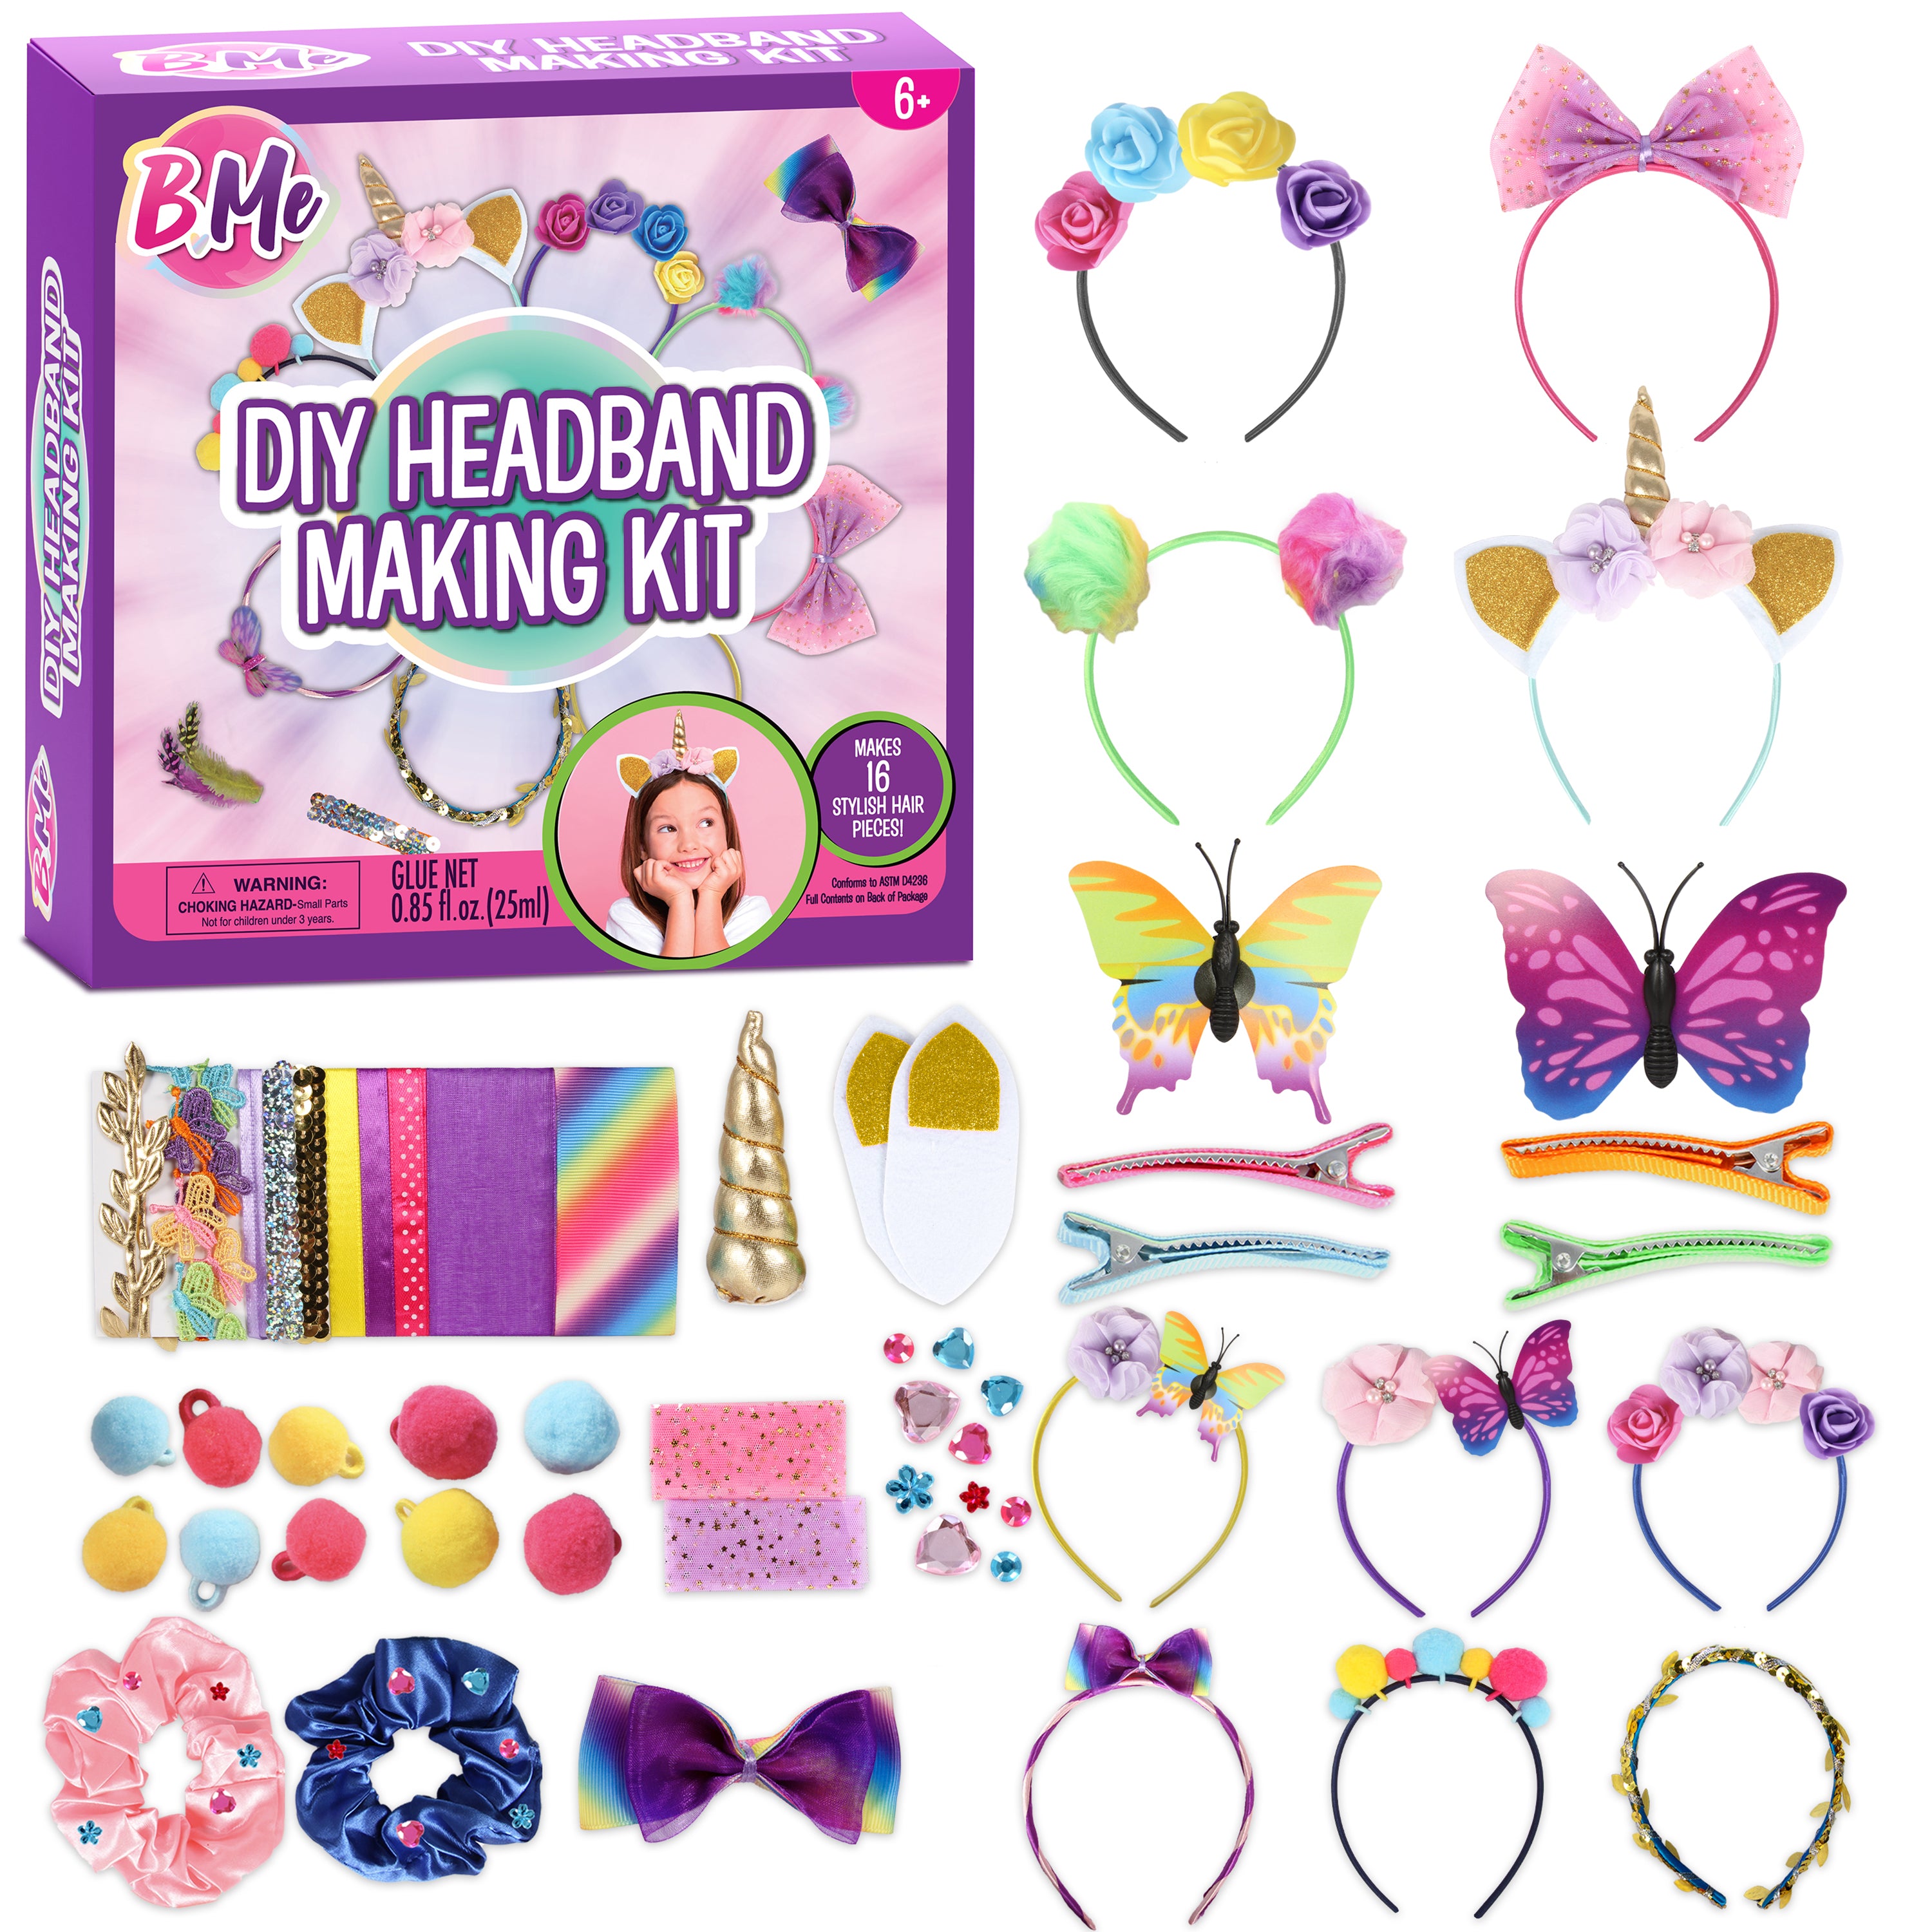  Daover Headband Making Kit for Girls - Creative Your Own  Headbands with 50+ Mermaid Charms, Hair Accessories for Girls, DIY Craft  Kits for Kids Mermaid Gifts for Girls 6-12 Years Old 